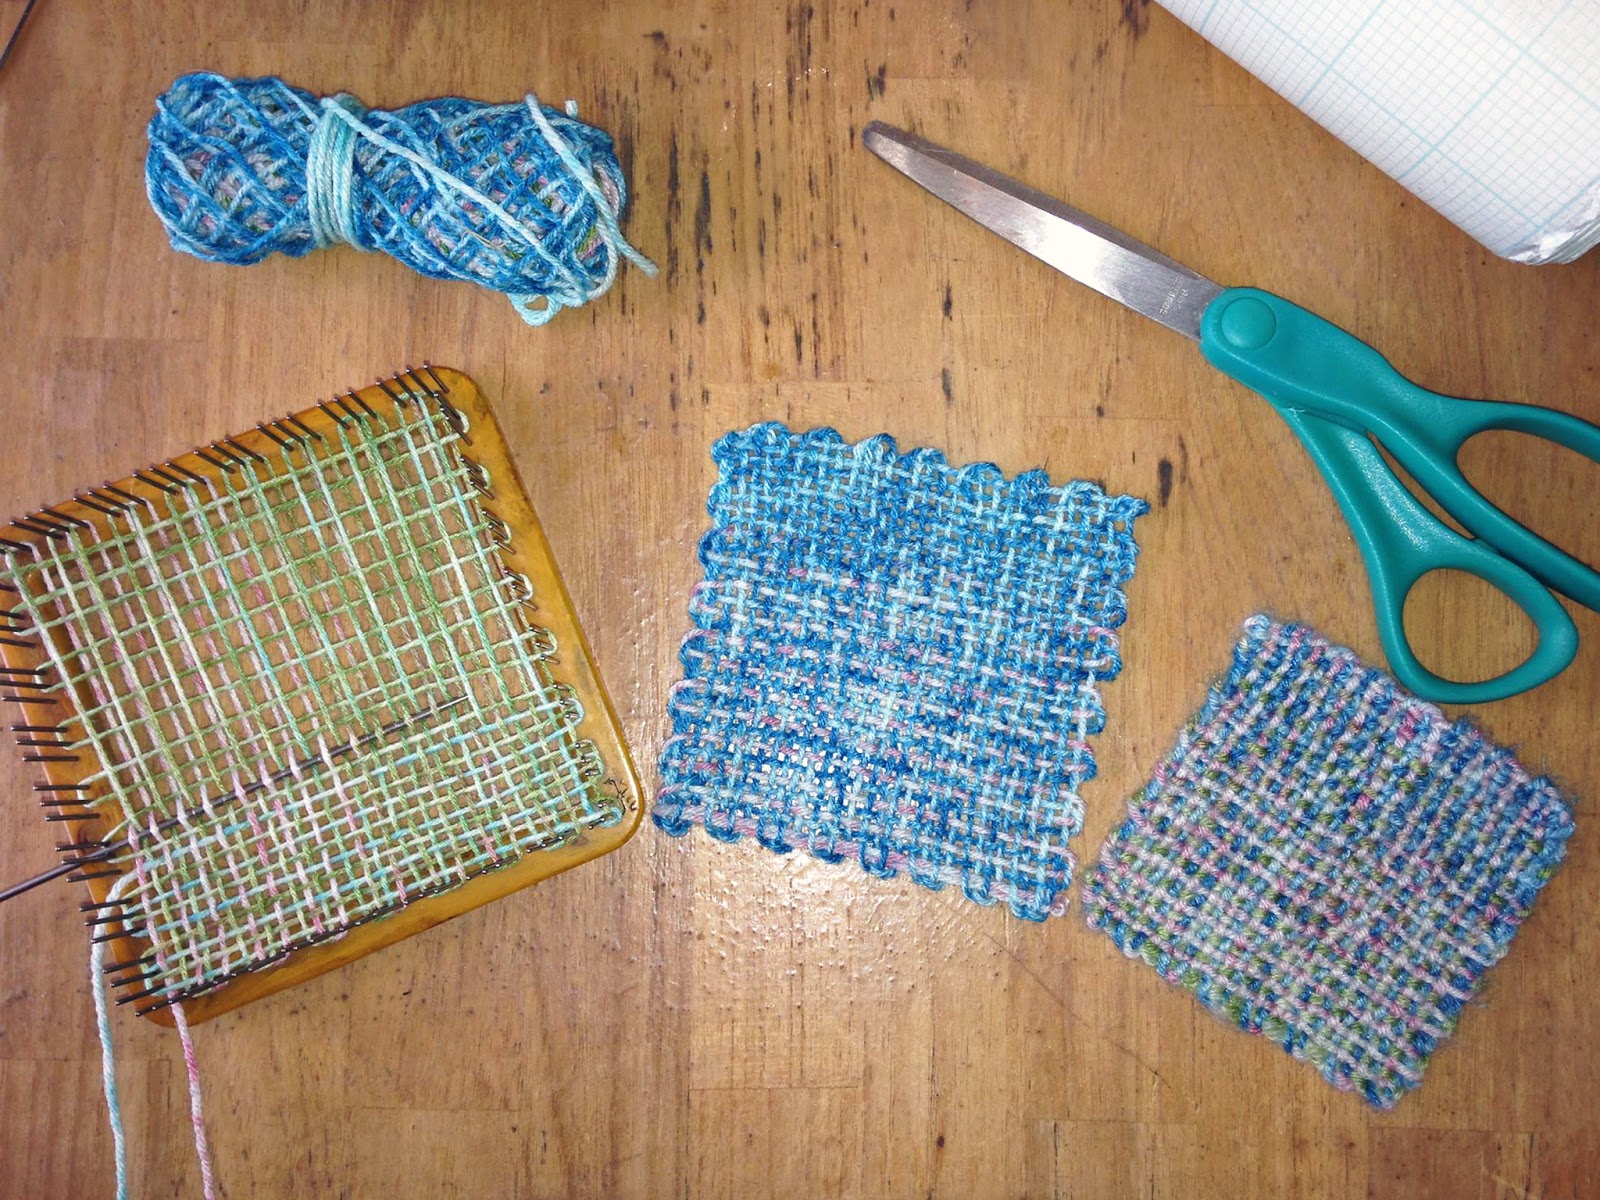 Tangible Daydreams: Weaving on a vintage Weave It pin loom